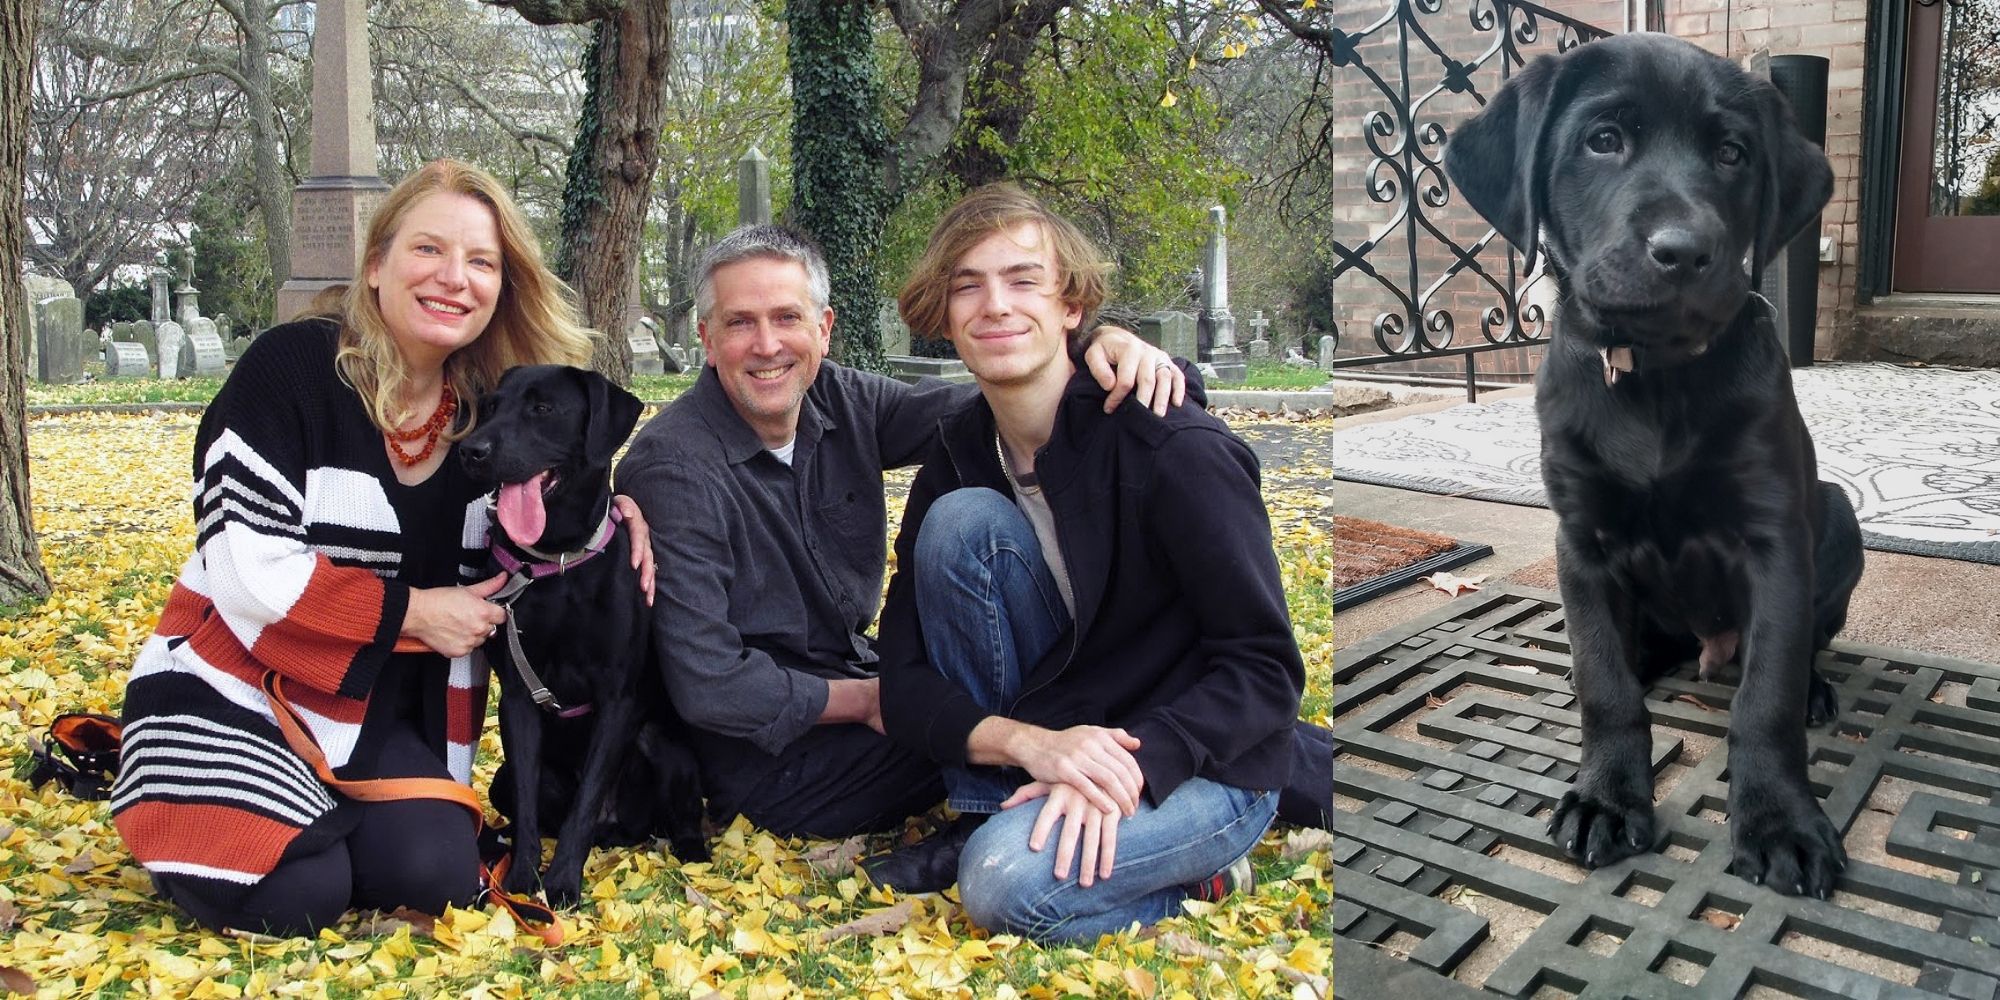 At left, Heather Calvert poses with her foster puppy, husband, and son on the ground in a cemetery with autumn leaves, foster dog as a puppy sitting on a welcome mat. 